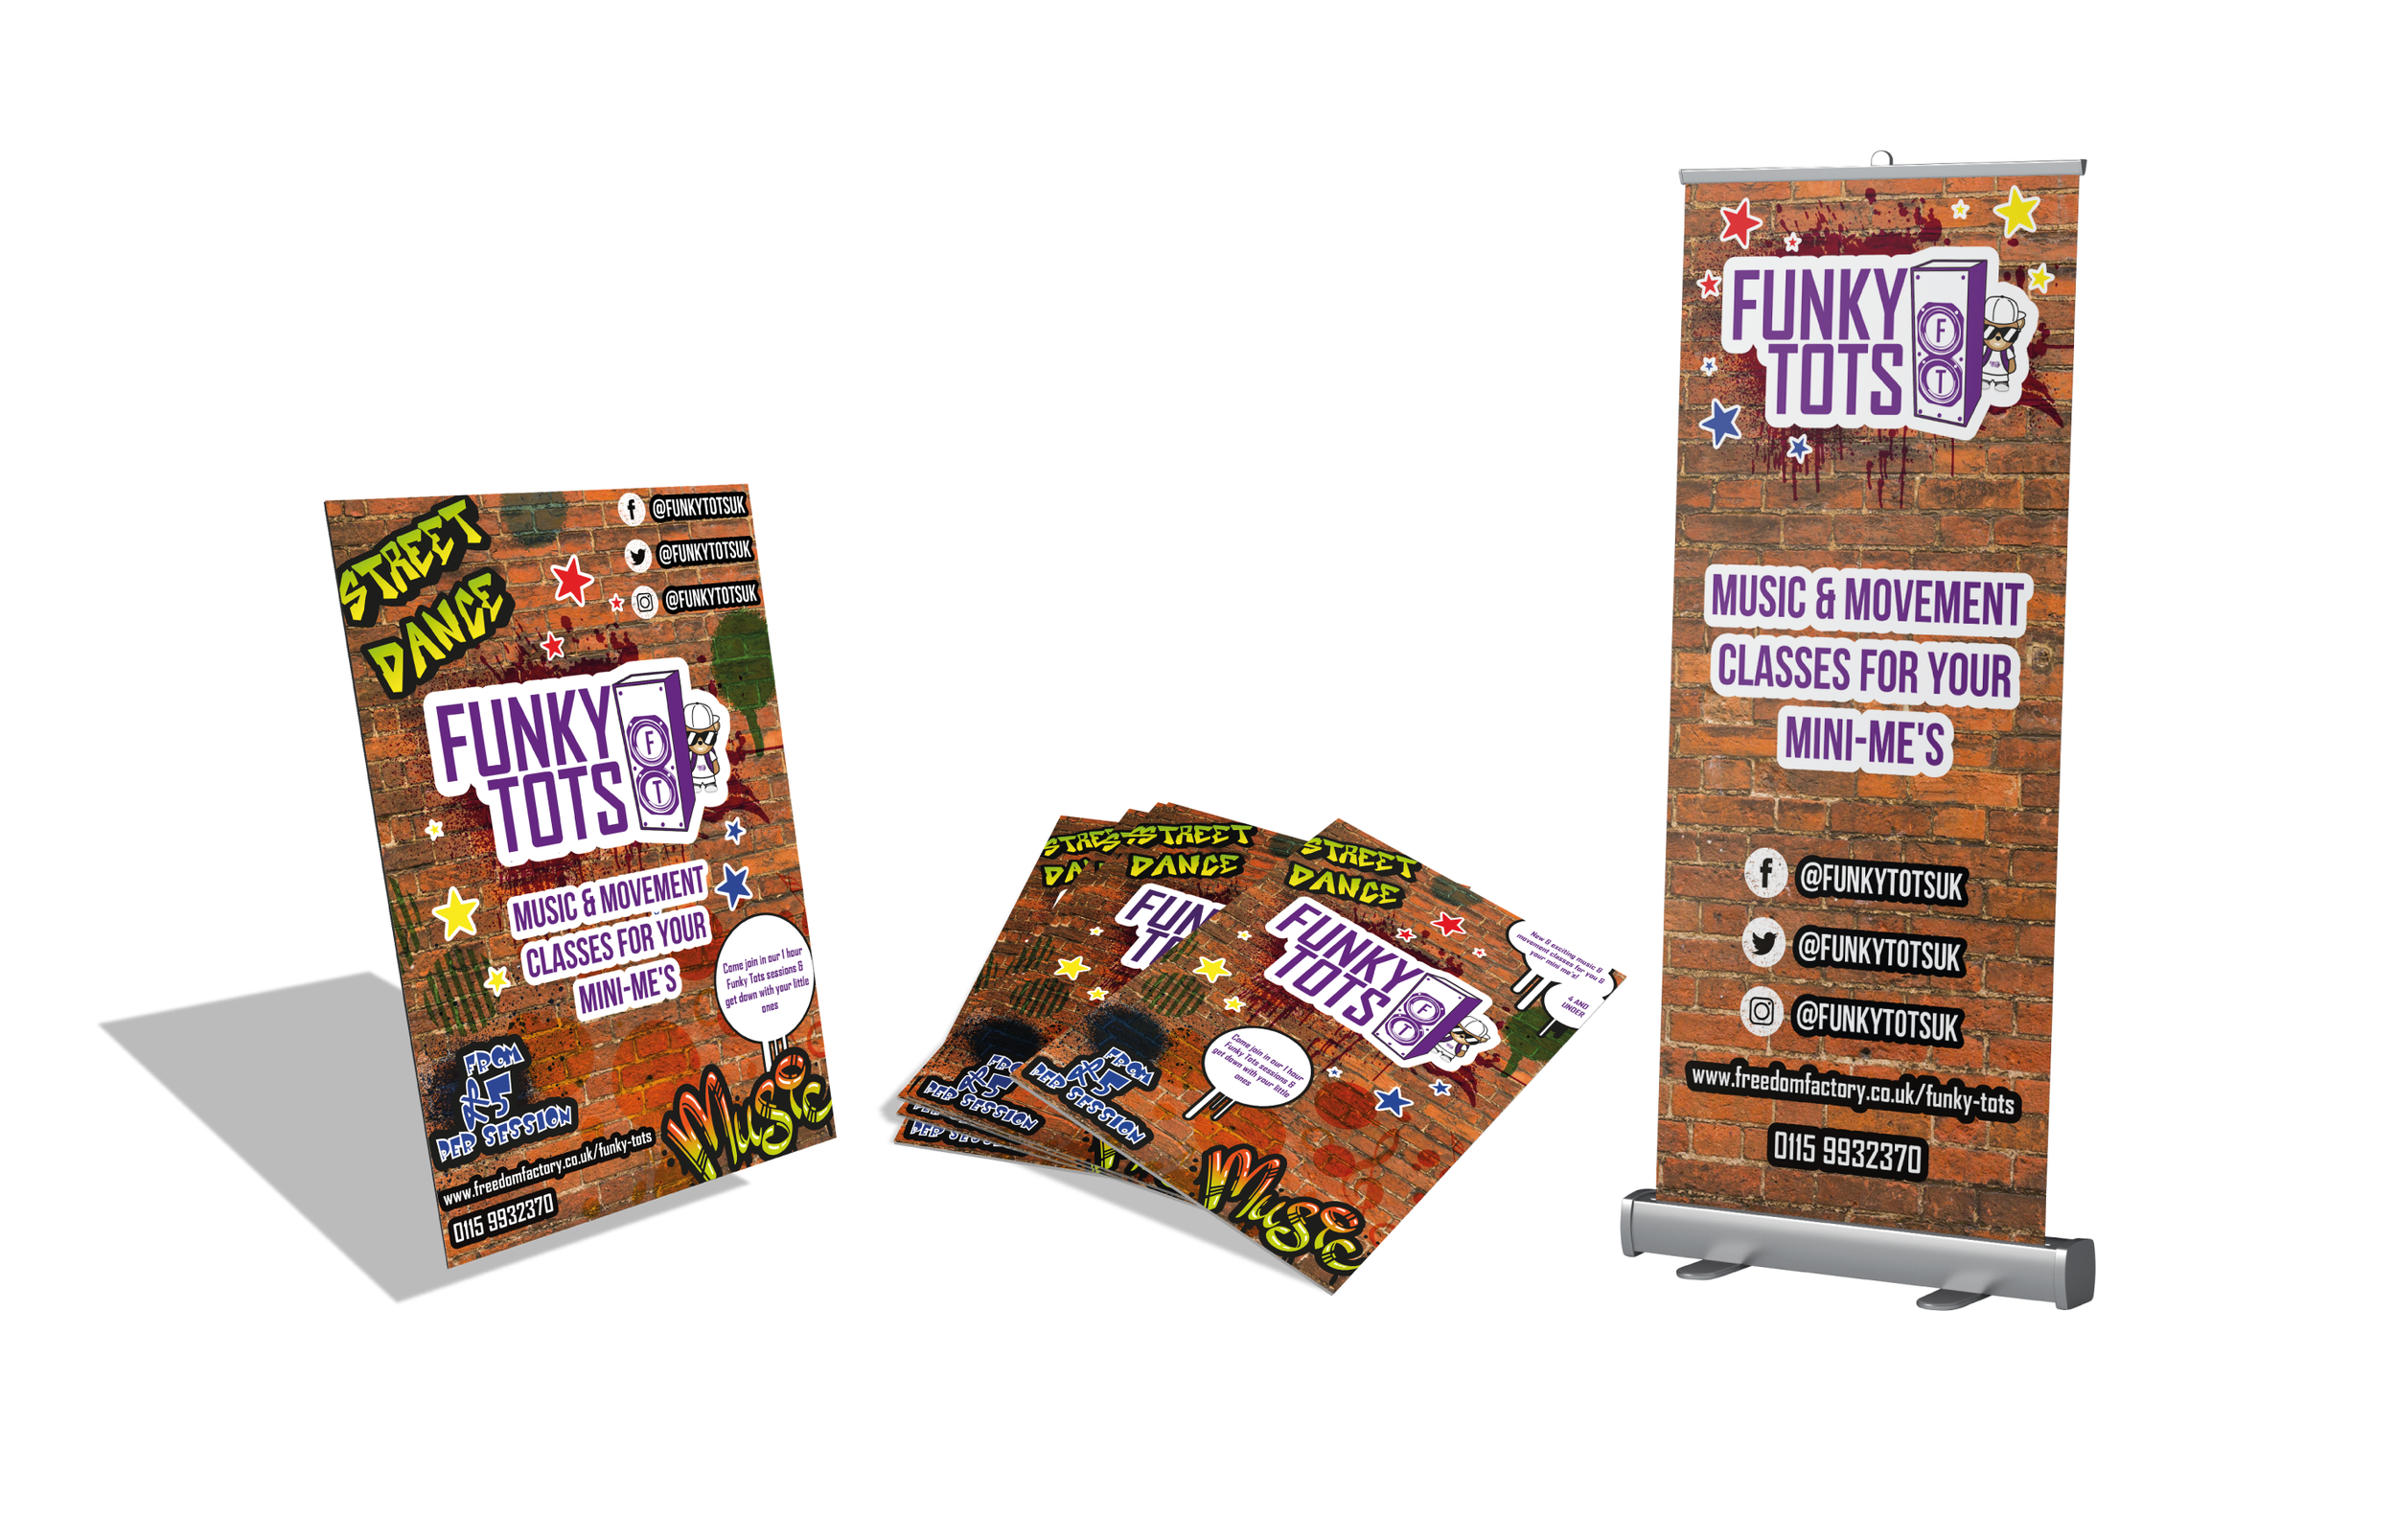 Funky Tots Printed Collateral Design and Print (Copy)